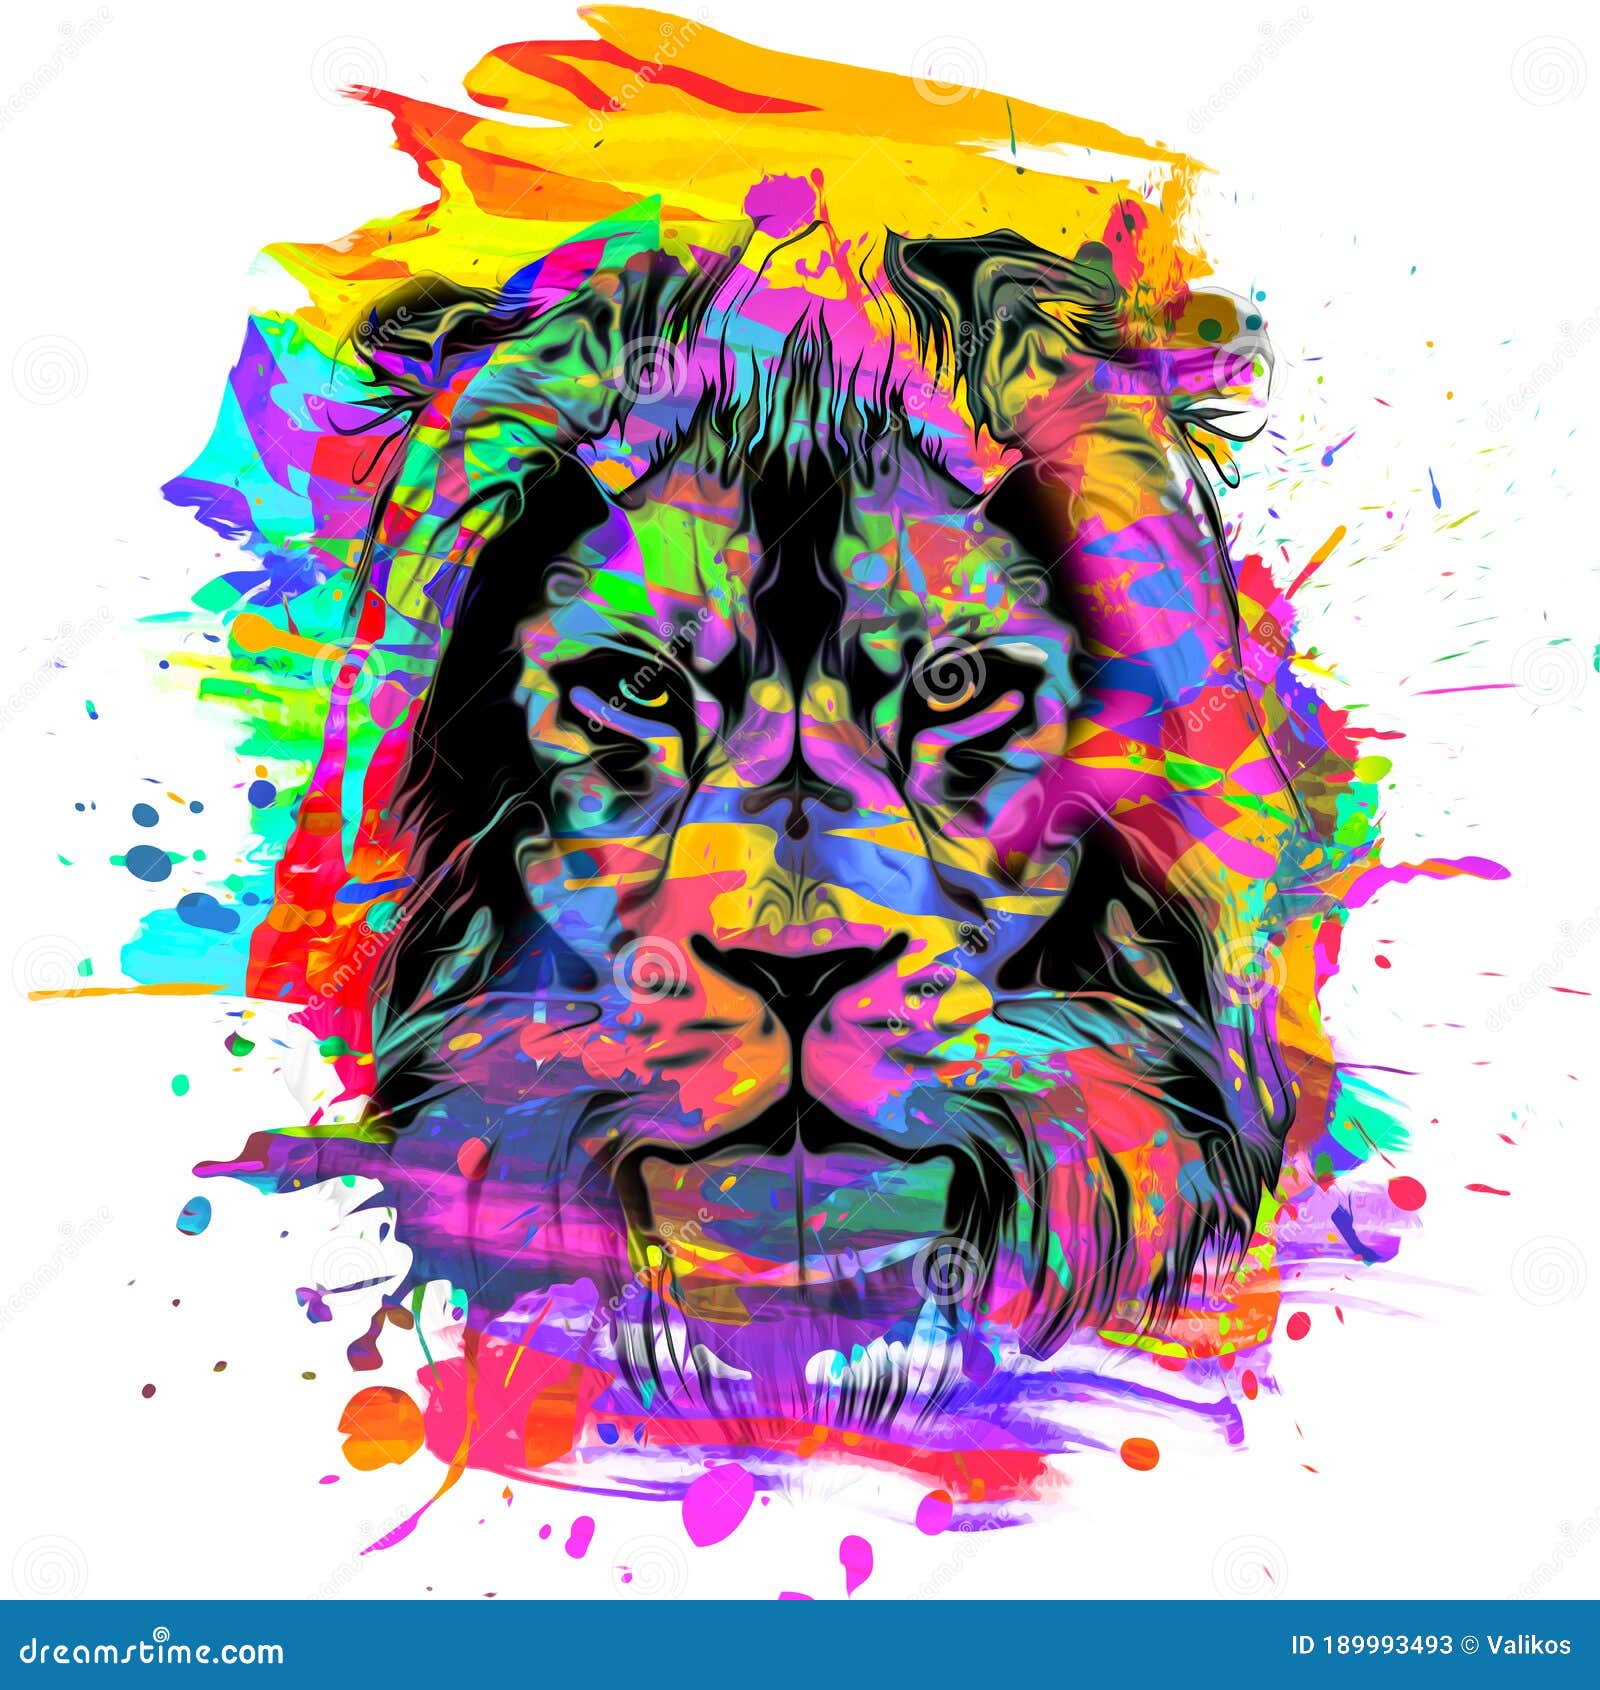 abstract creative  with colorful lion